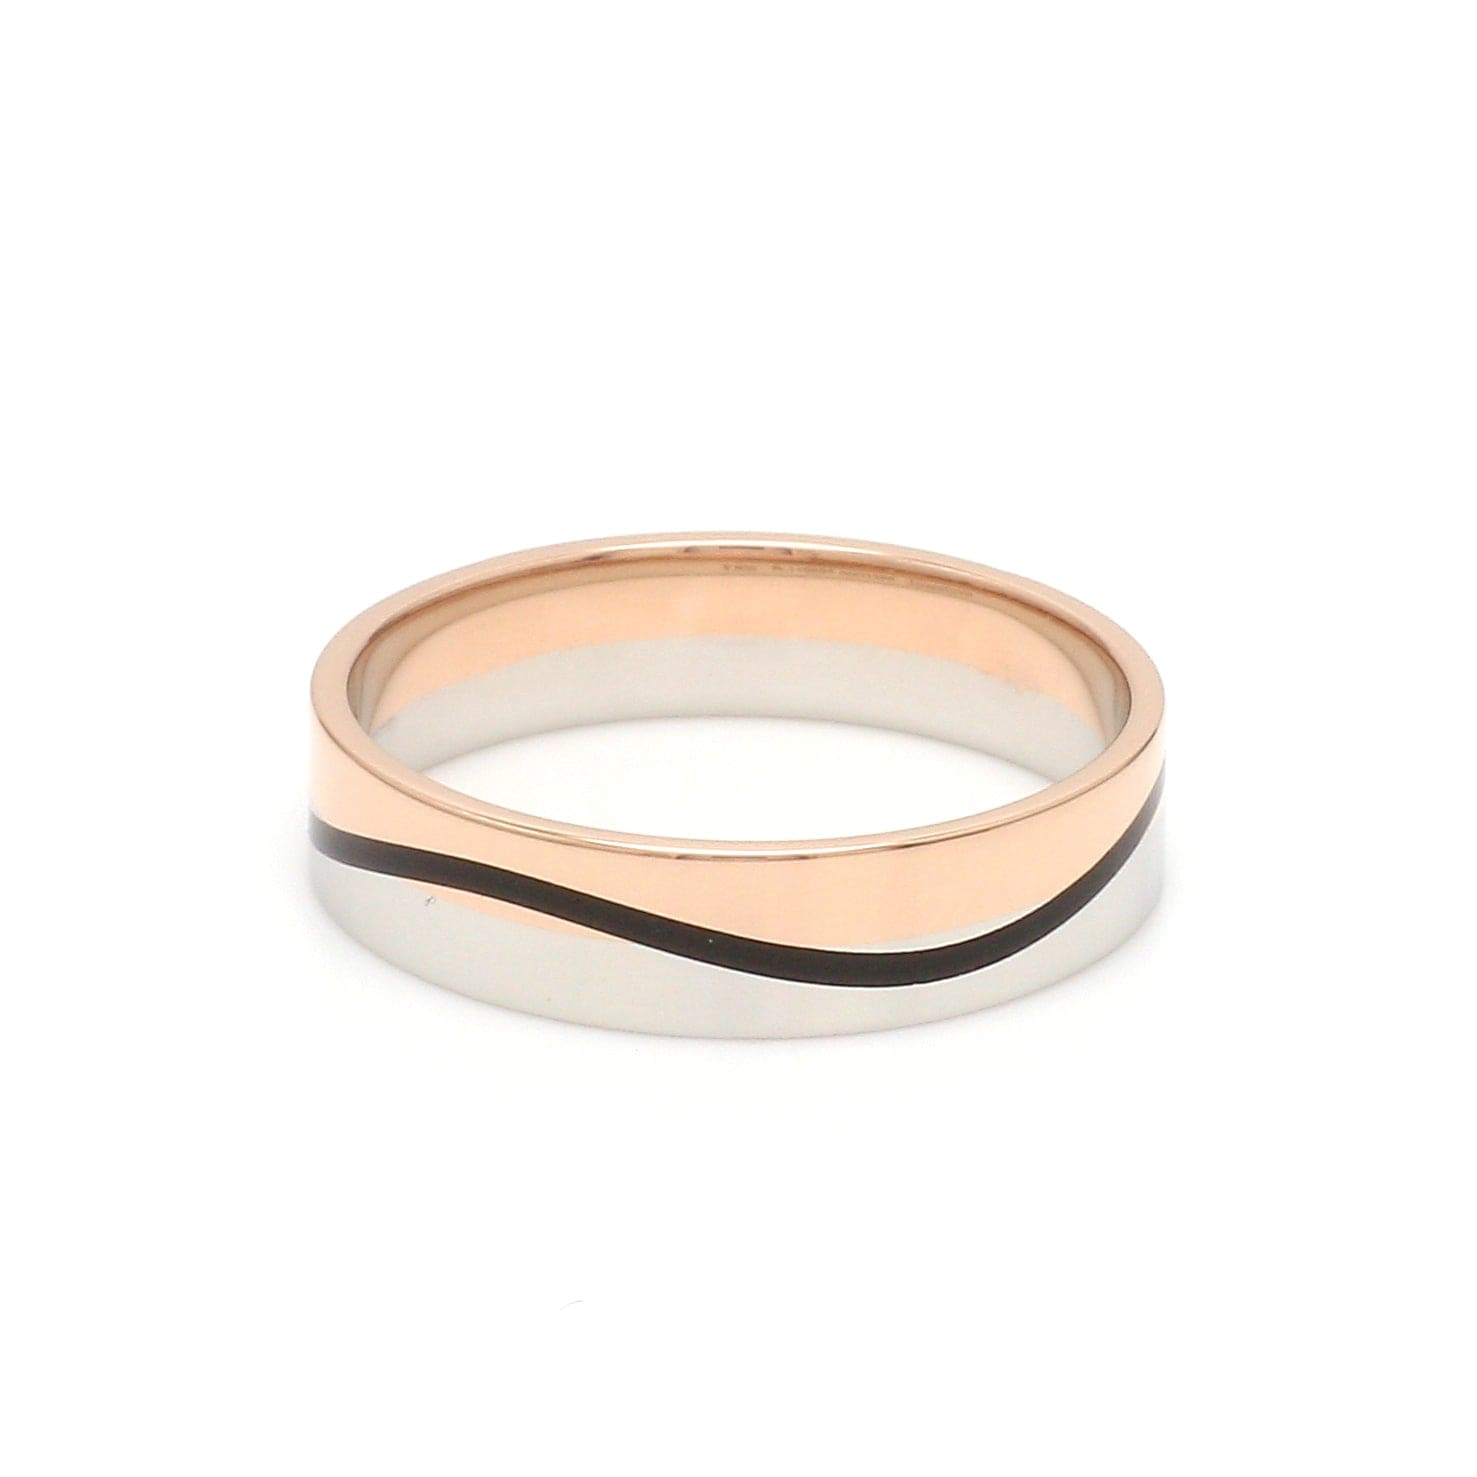 The Whiz - Men's Rose Gold Plated Wedding Ring | Manly Bands